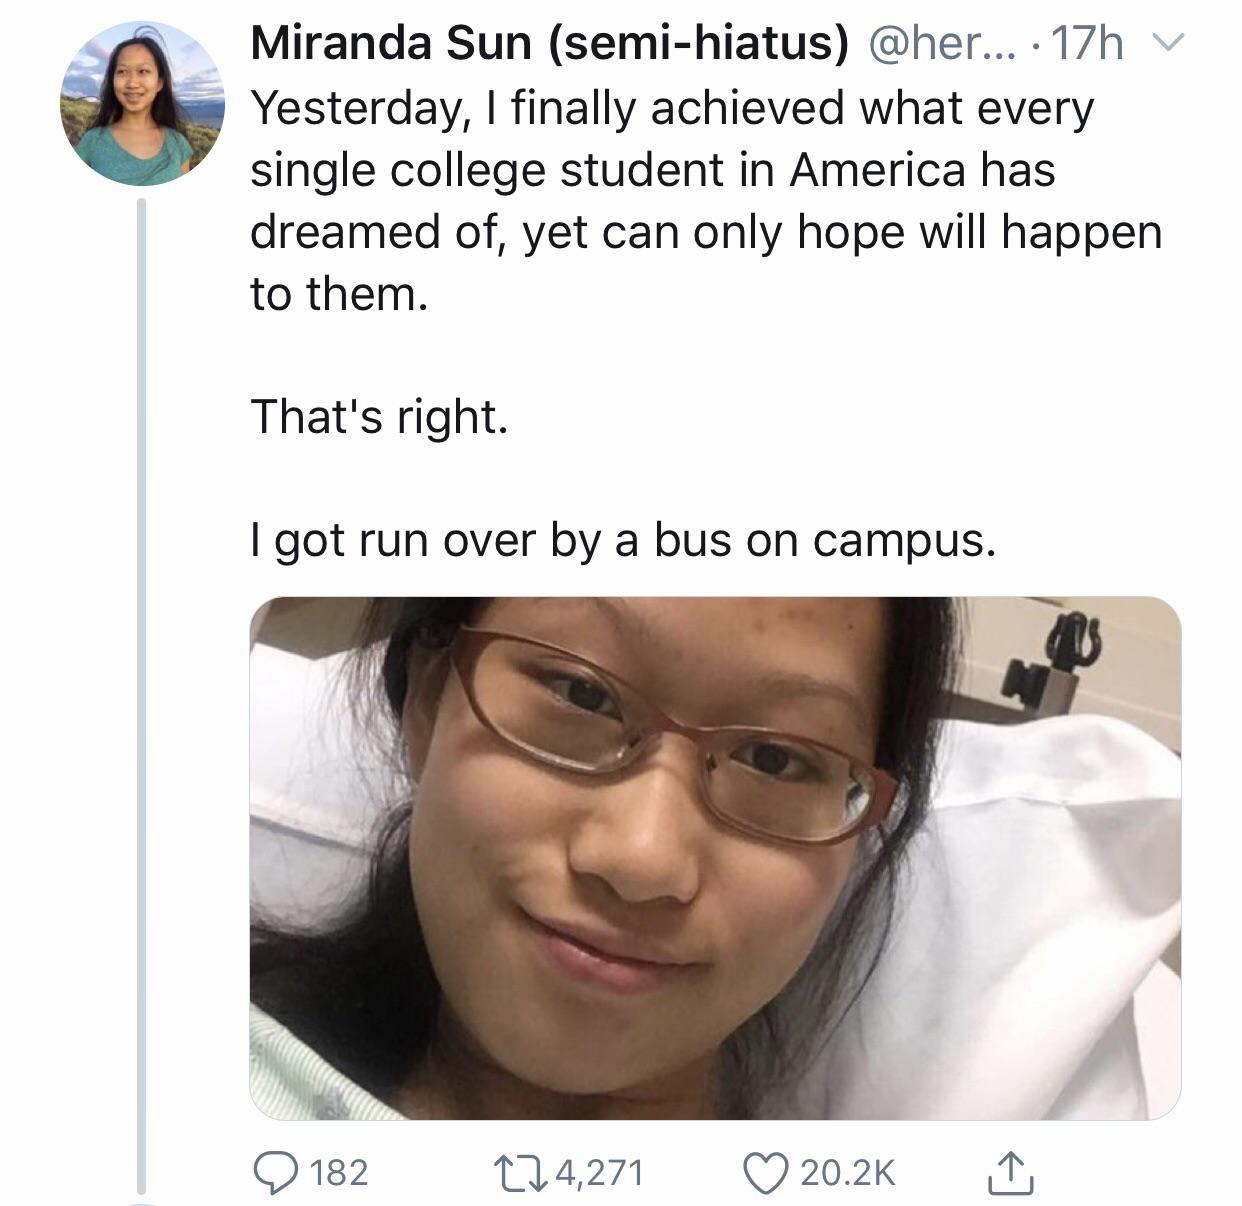 depression depression-memes depression text: Miranda Sun (semi-hiatus) @her ... • 17h Yesterday, I finally achieved what every single college student in America has dreamed of, yet can only hope will happen to them. That's right. I got run over by a bus on campus. 0182 t-04,271 0 20.2K 